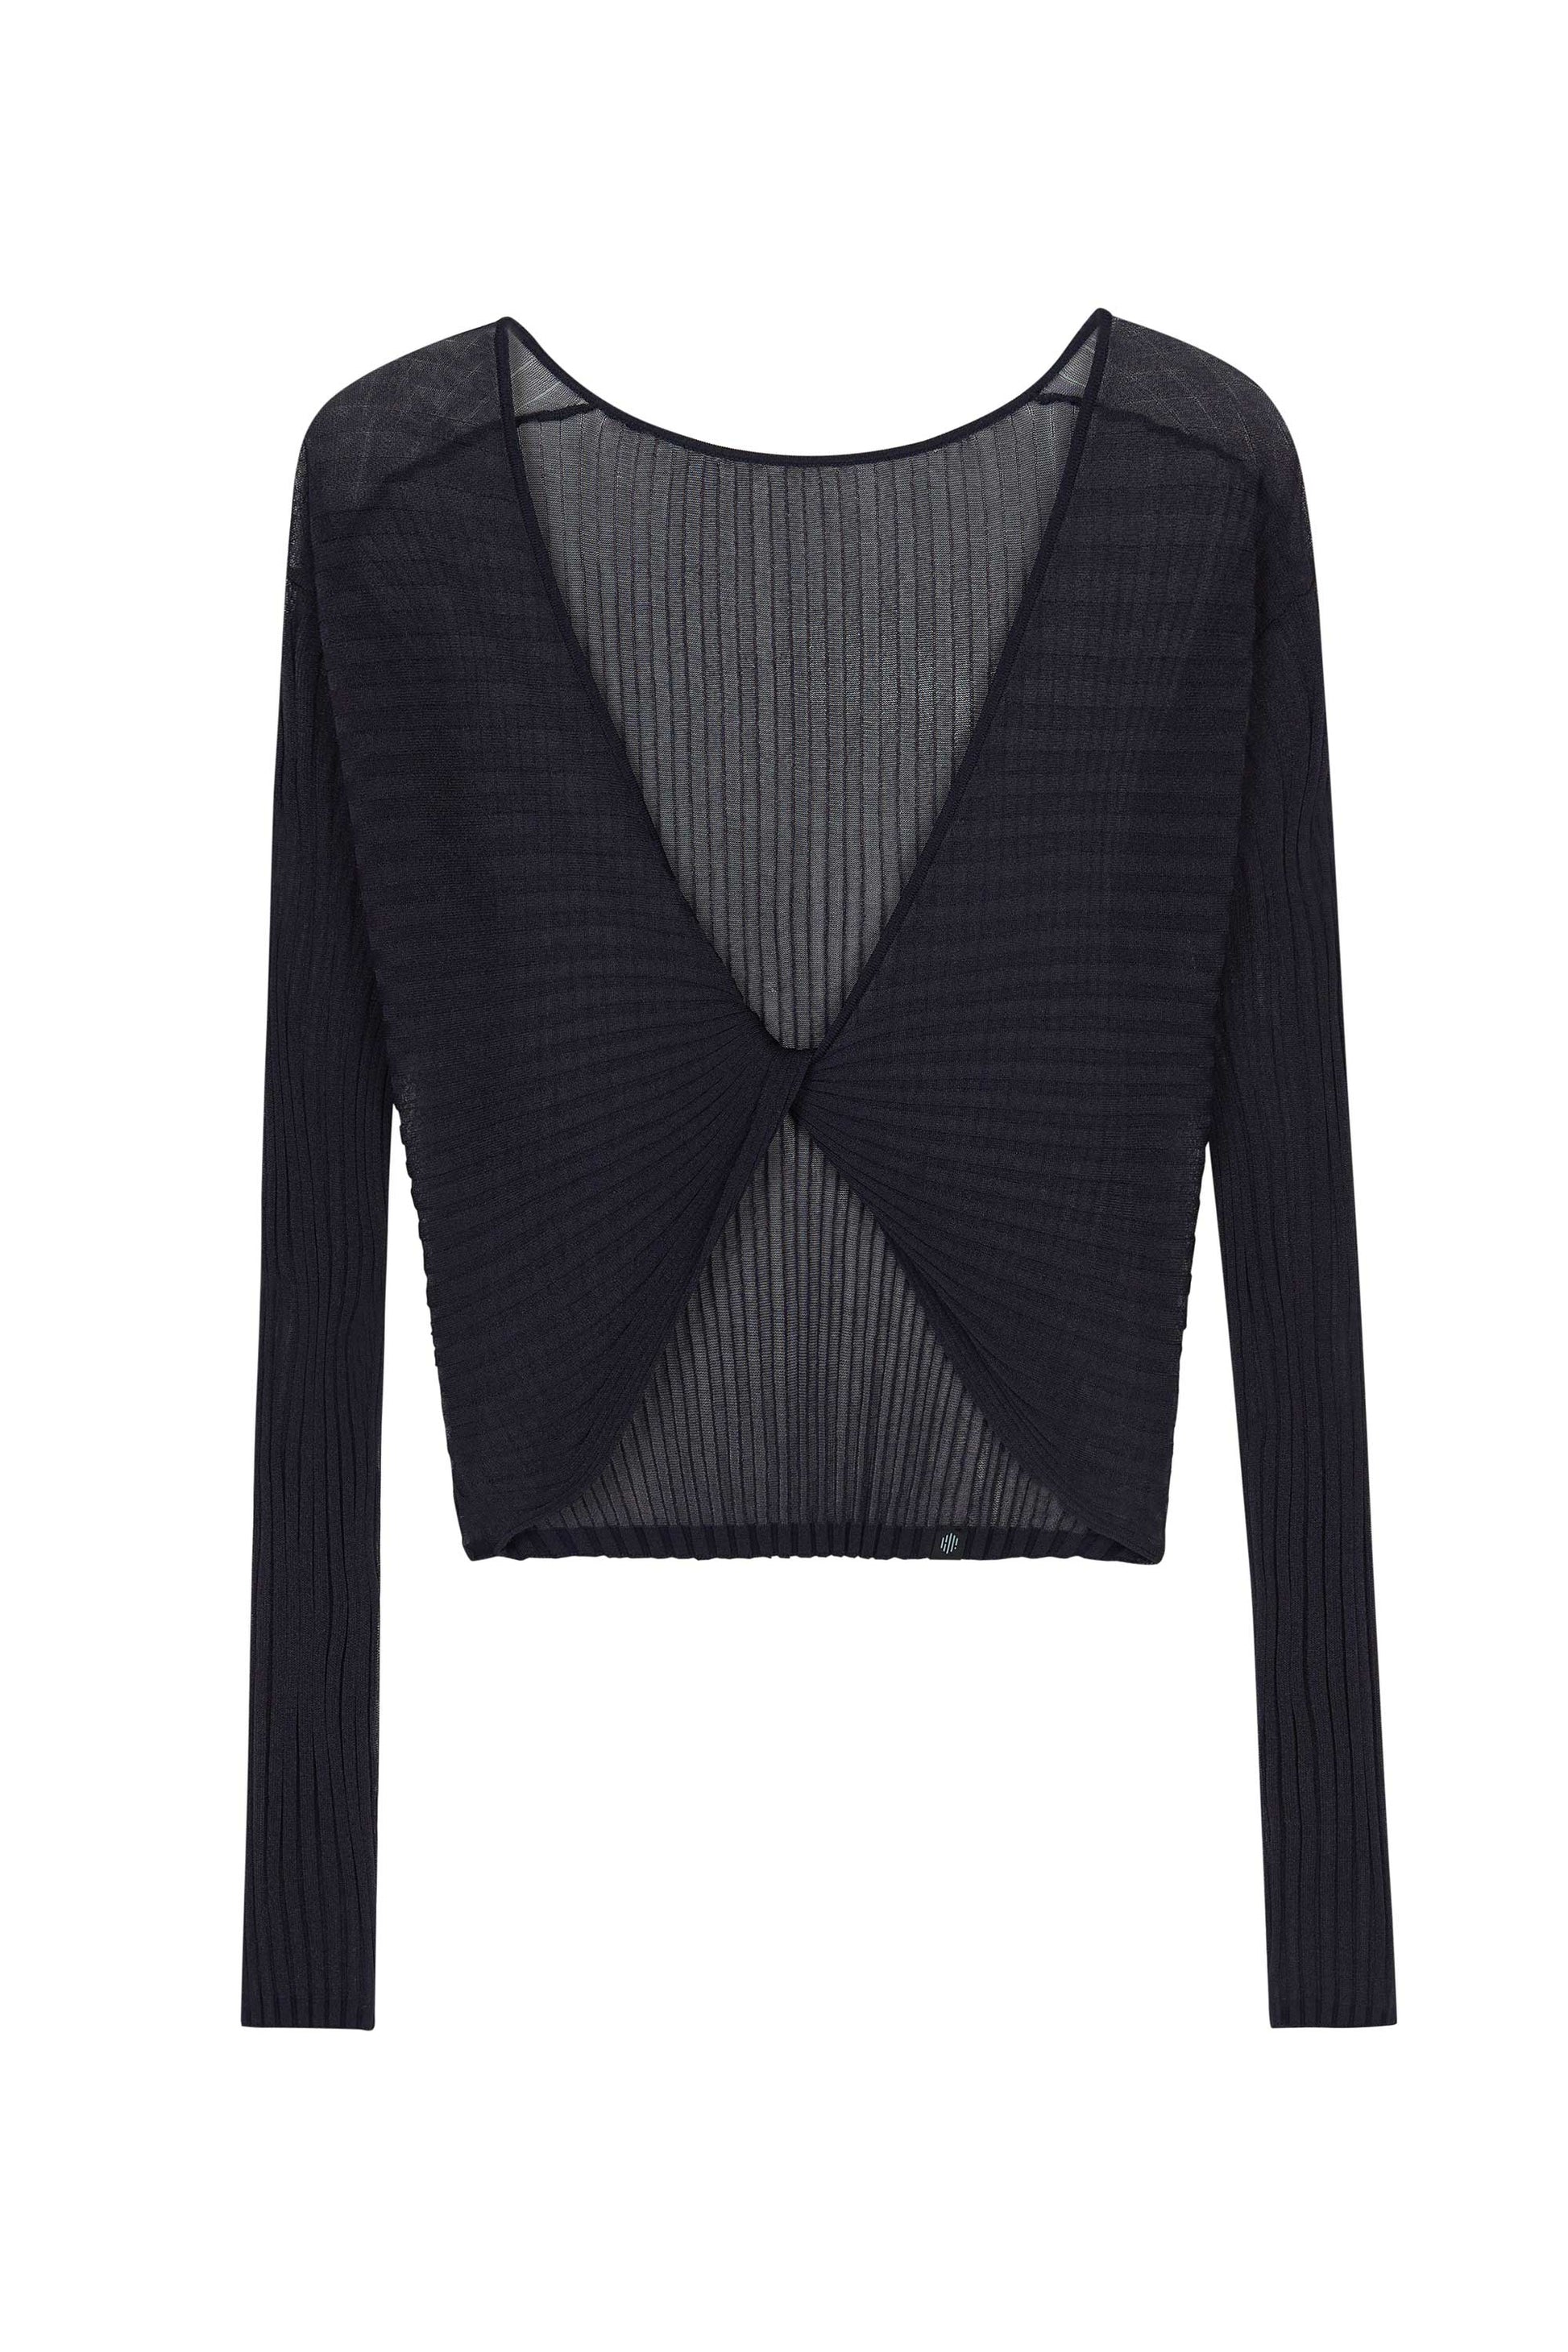 Flat Lay image of a navy knit top with front knot